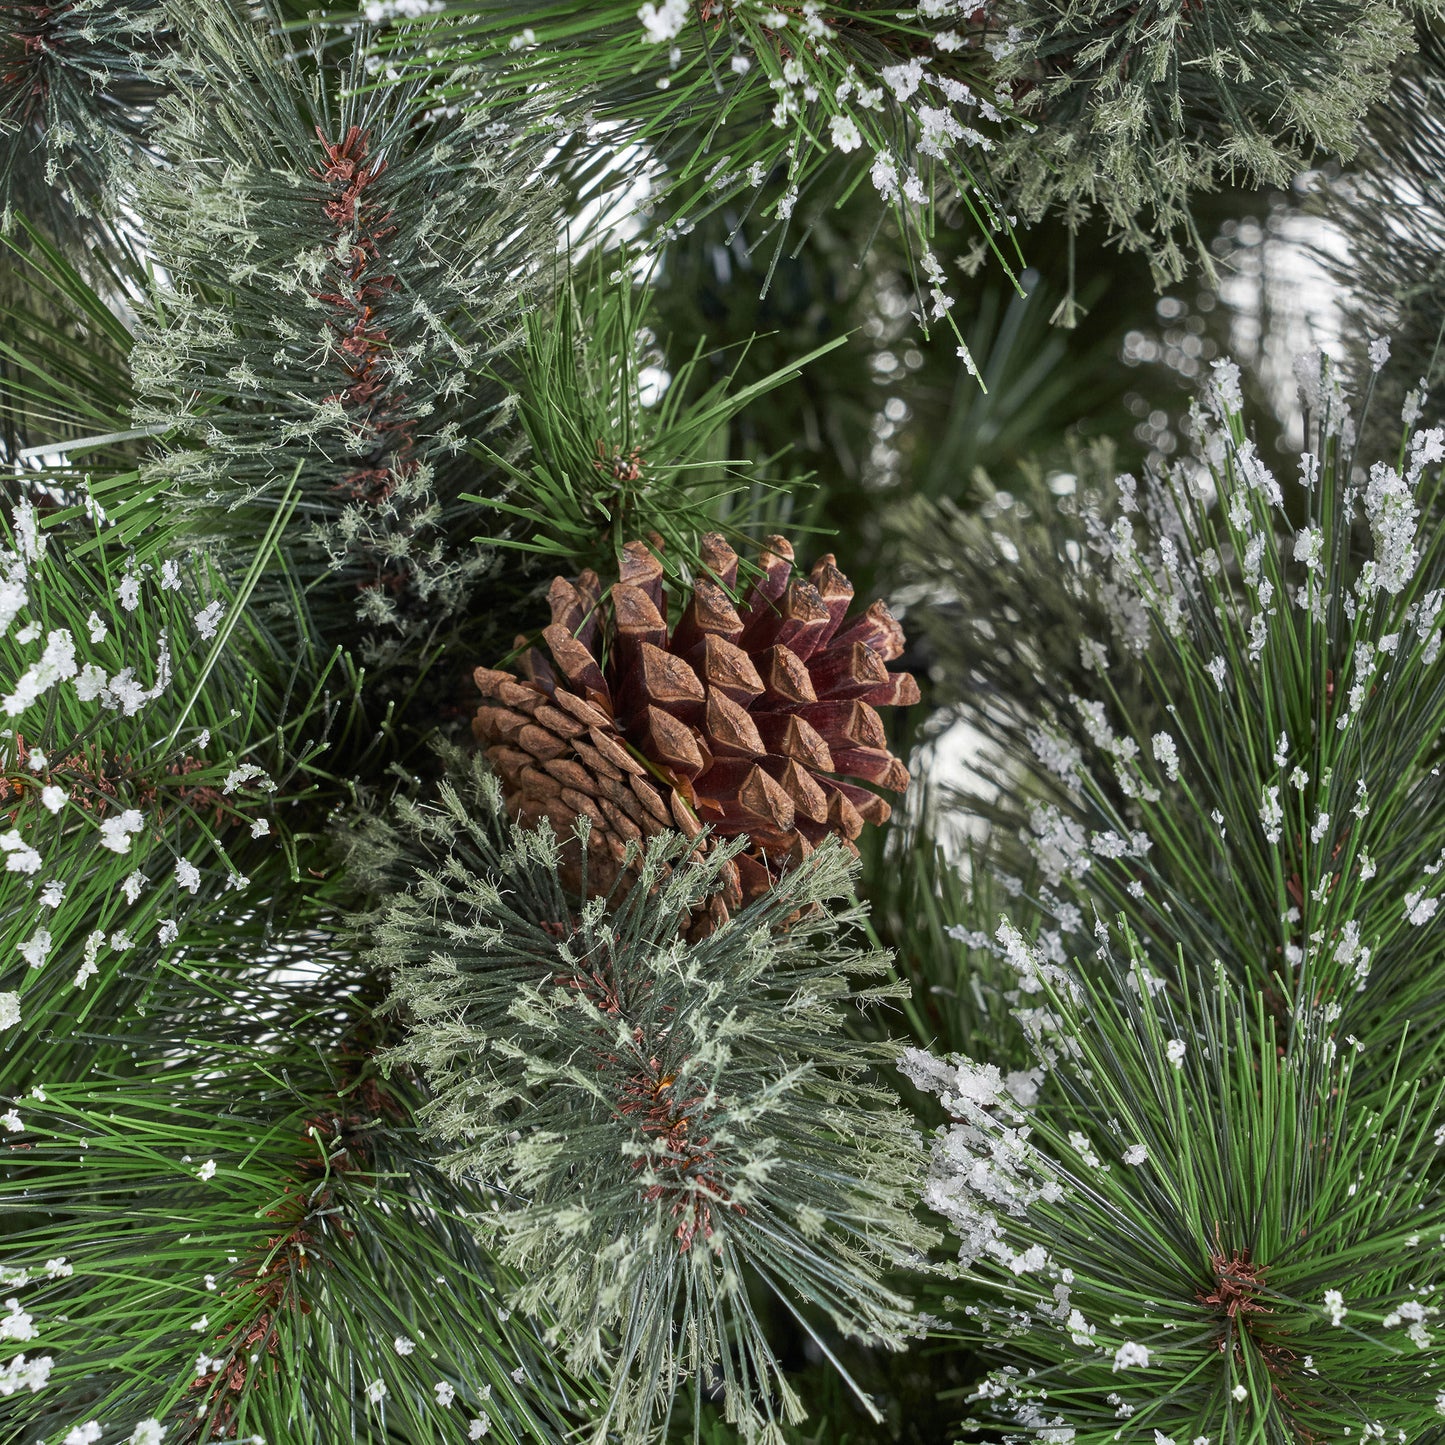 9-foot Cashmere Pine and Mixed Needles Hinged Artificial Christmas Tree with Snowy Branches and Pinecones